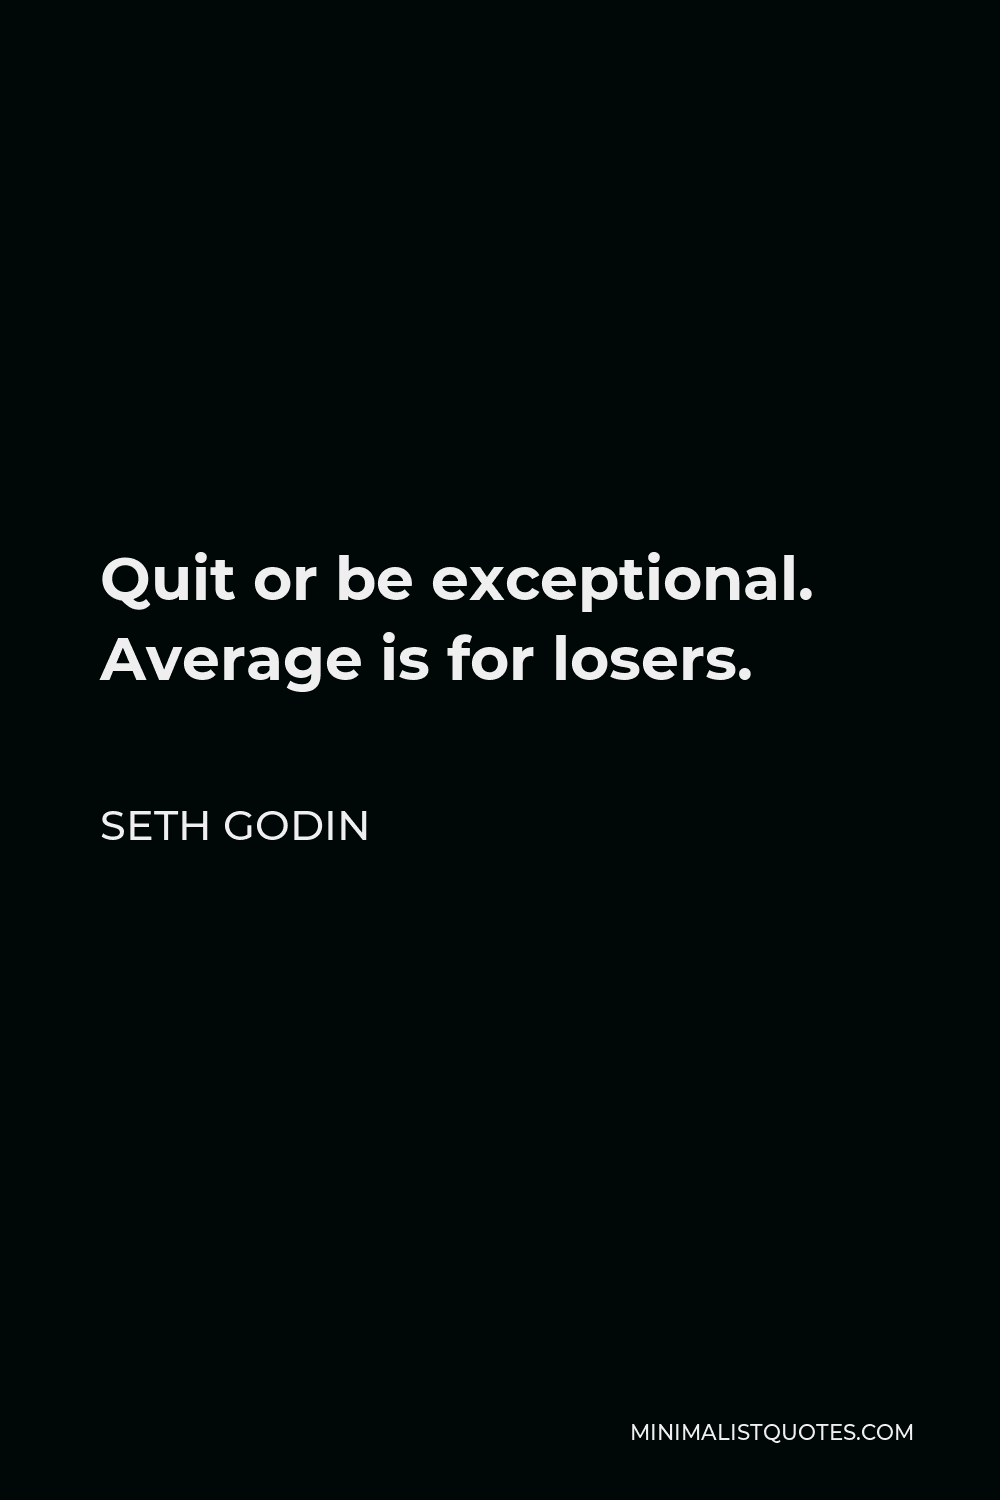 Seth Godin Quote - Quit or be exceptional. Average is for losers.